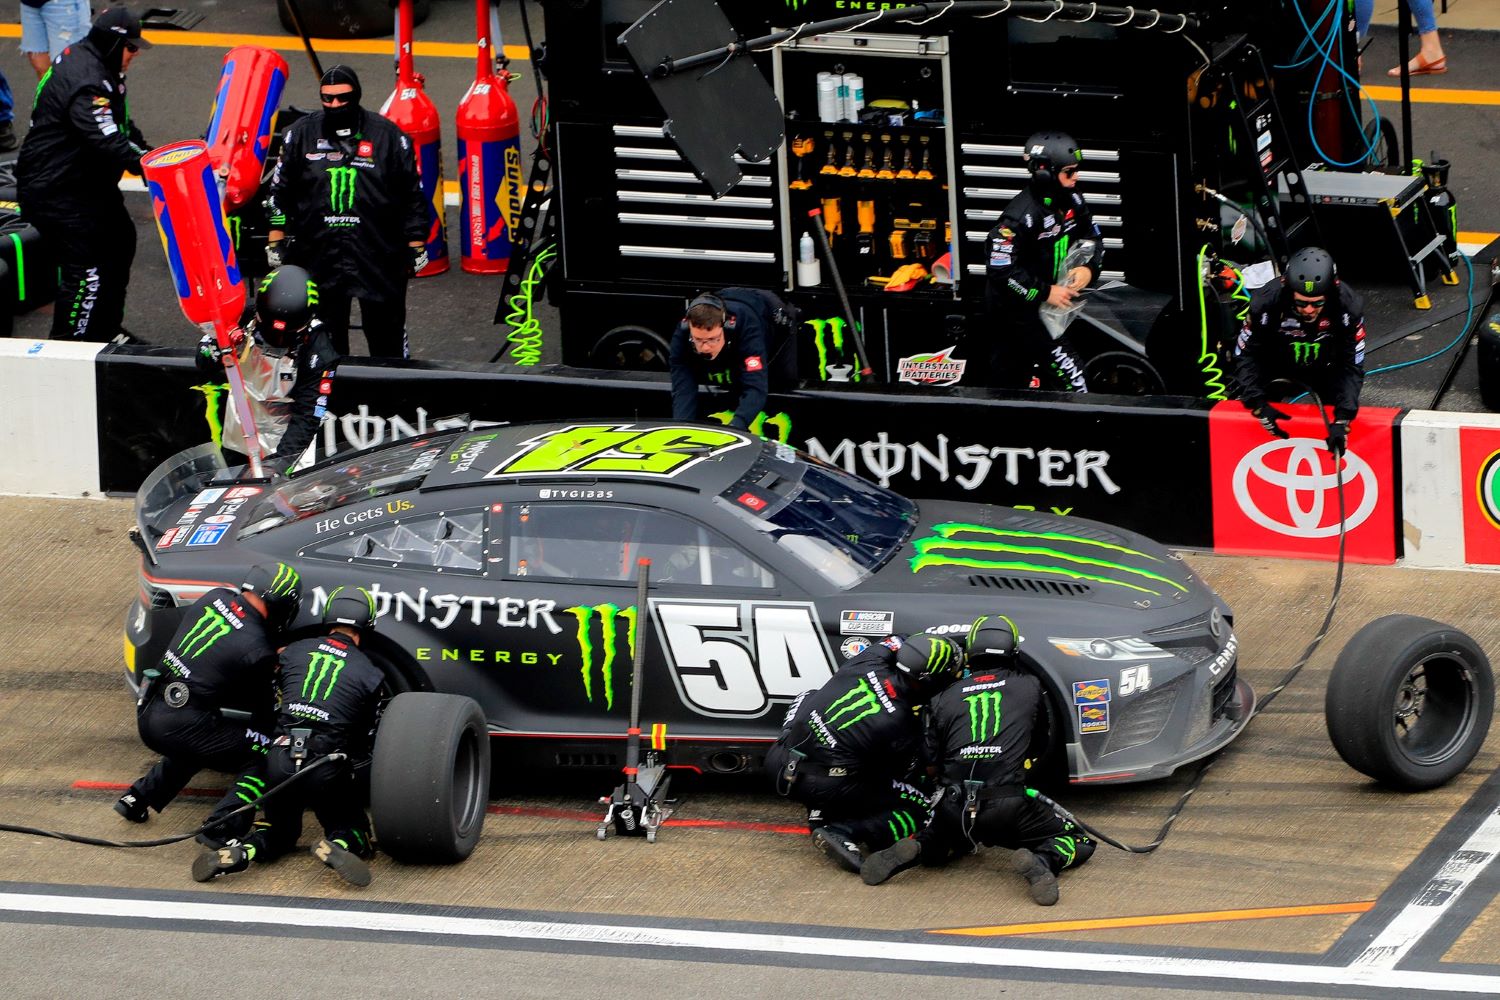 A race sponsored by Monster Energy